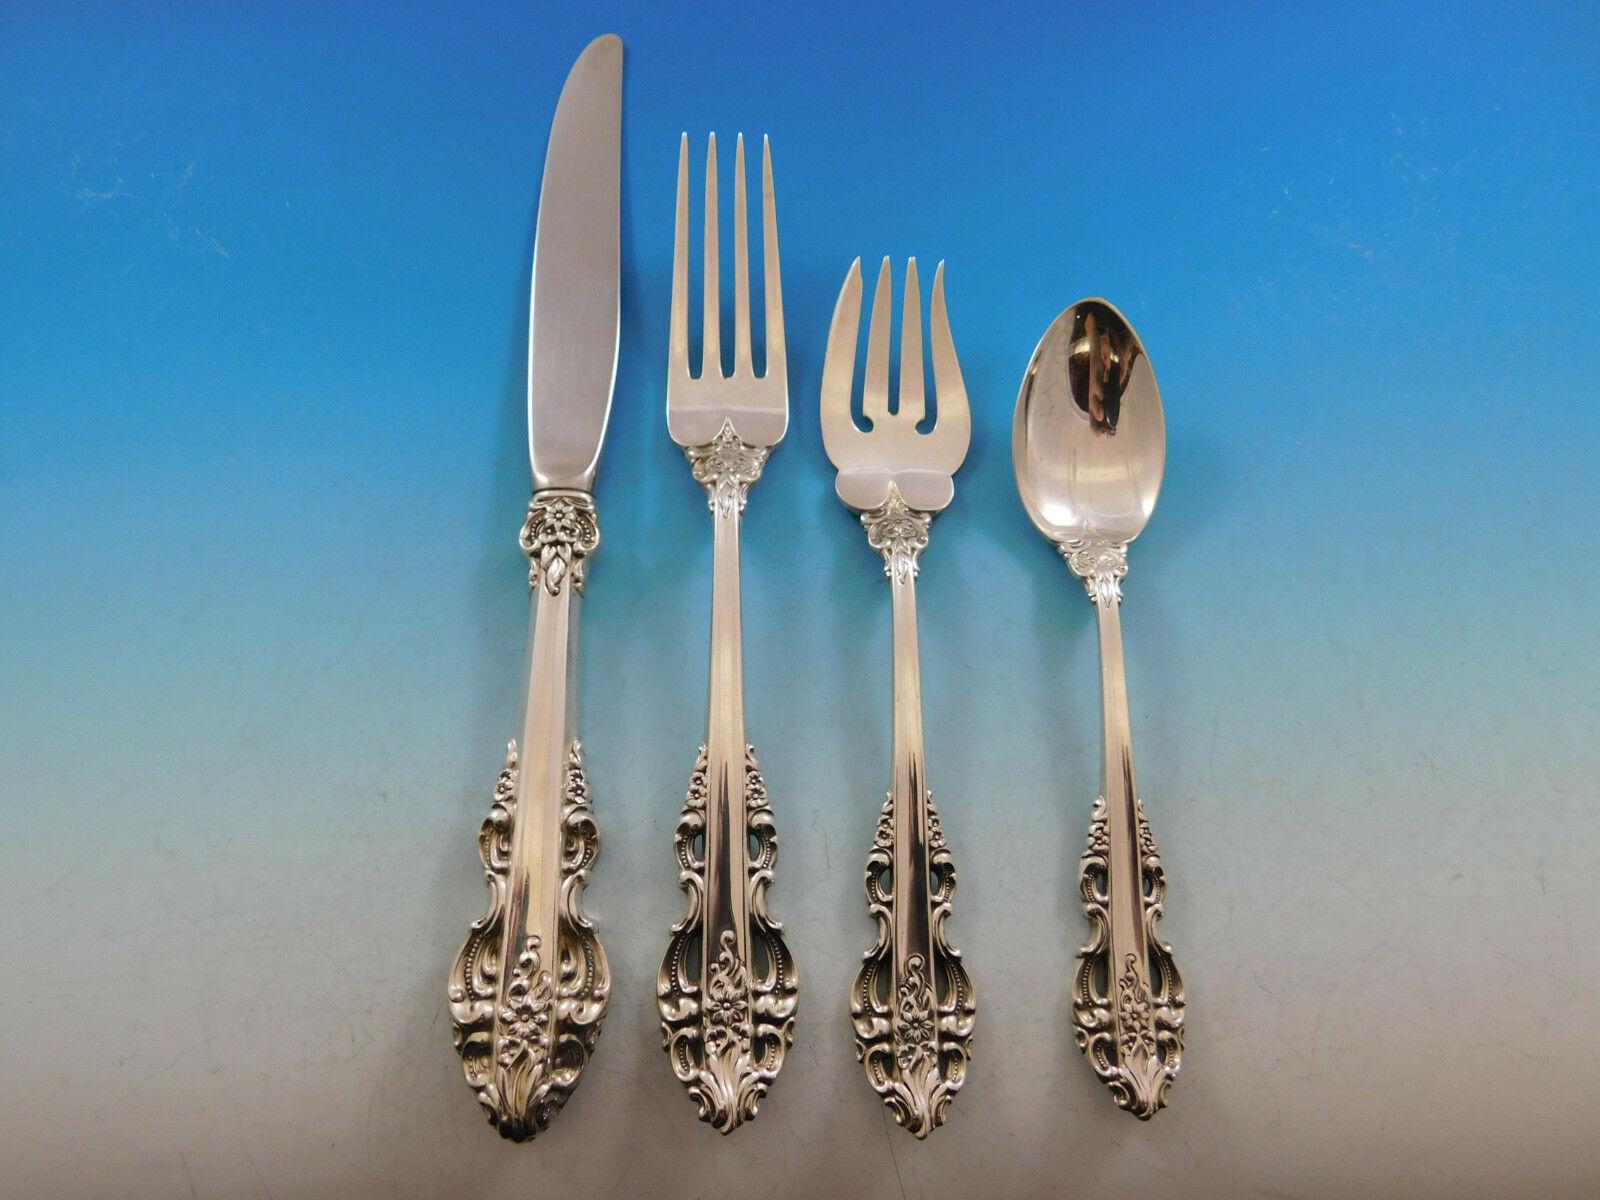 El Greco by Reed and Barton, circa 1972 sterling silver flatware set - 39 pieces. This set includes:
8 knives, 9 3/8